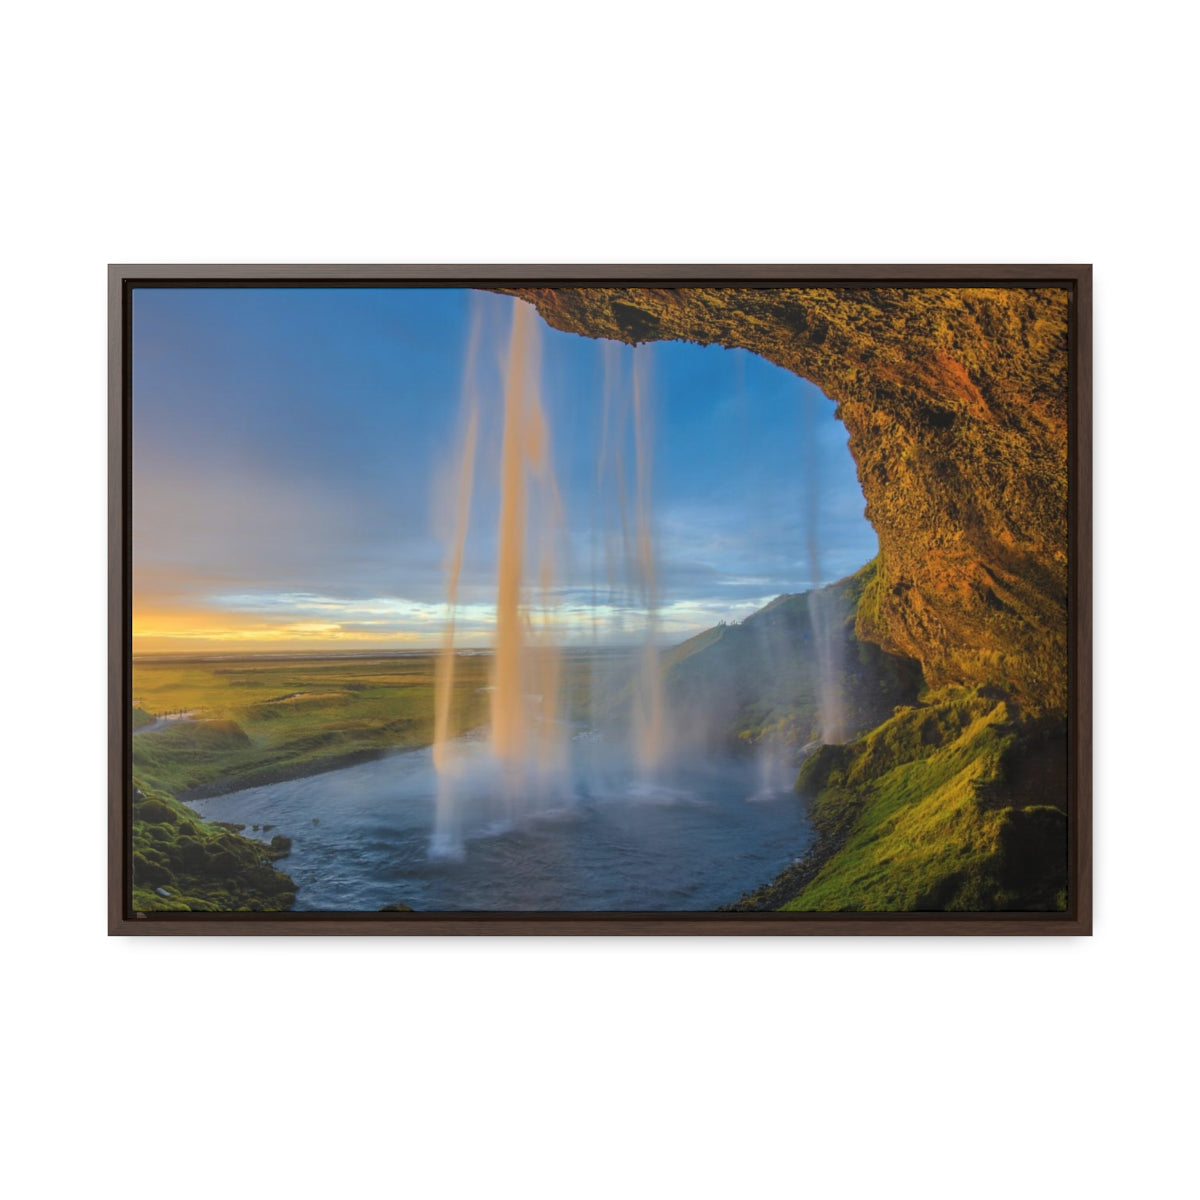 Cave Waterfall at Sunset Canvas Print